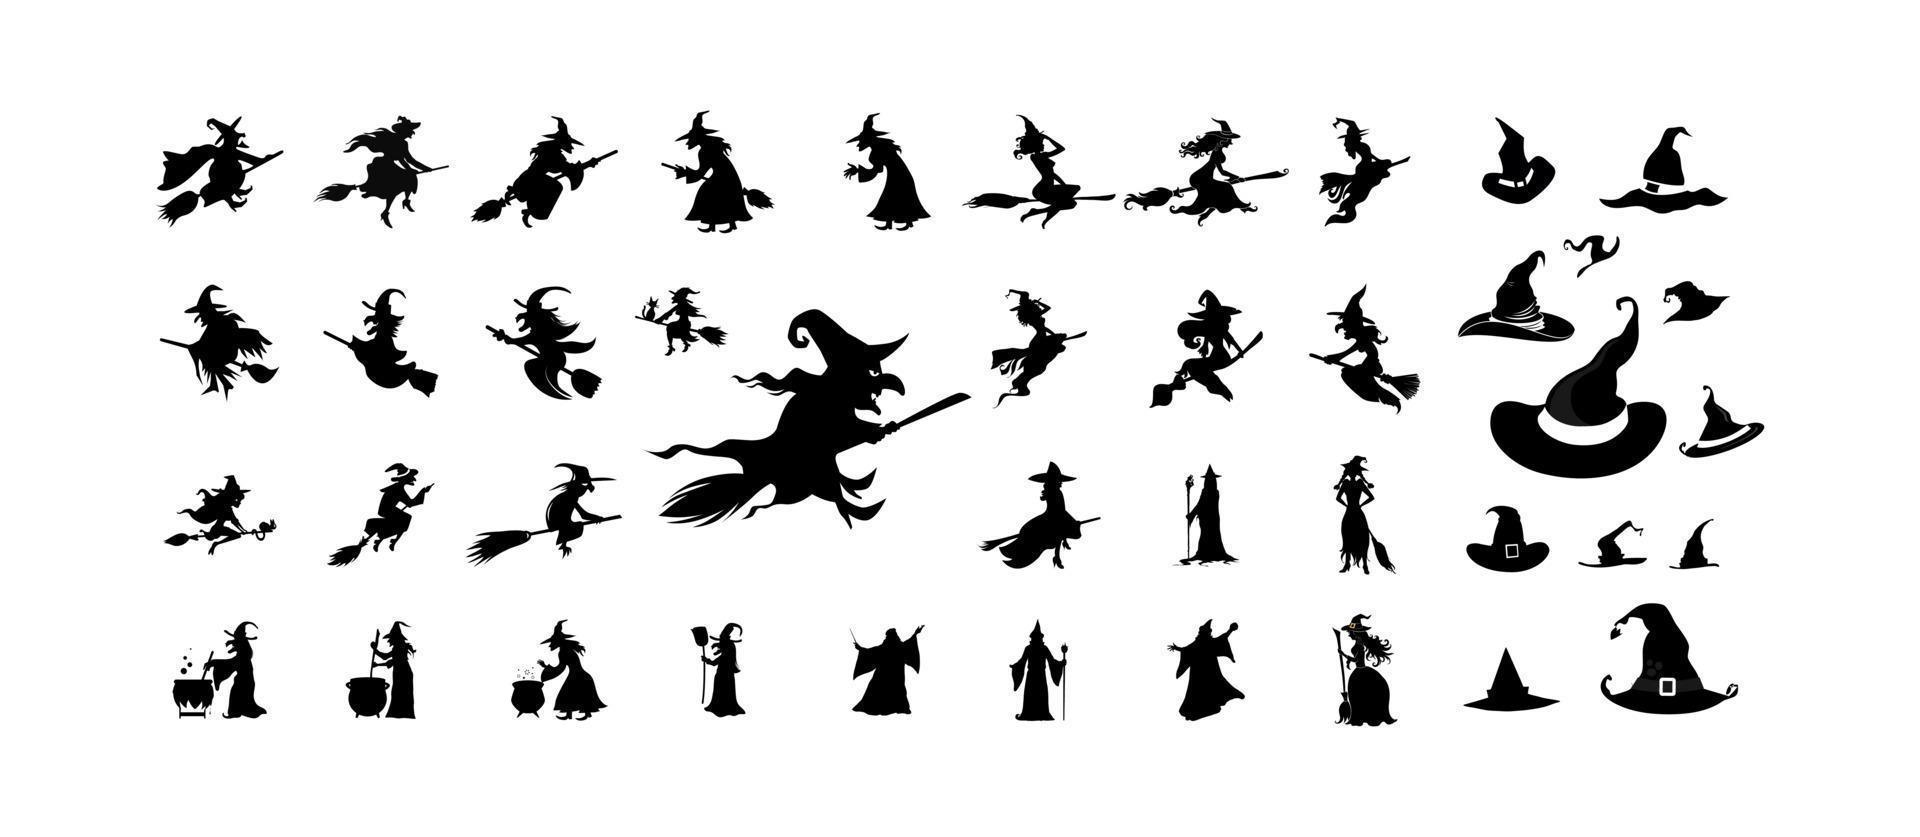 Halloween silhouettes black icons and characters trumpkin funny t-shirt Halloween pumpkin boo witch ghost skull bat skeleton vector illustration.